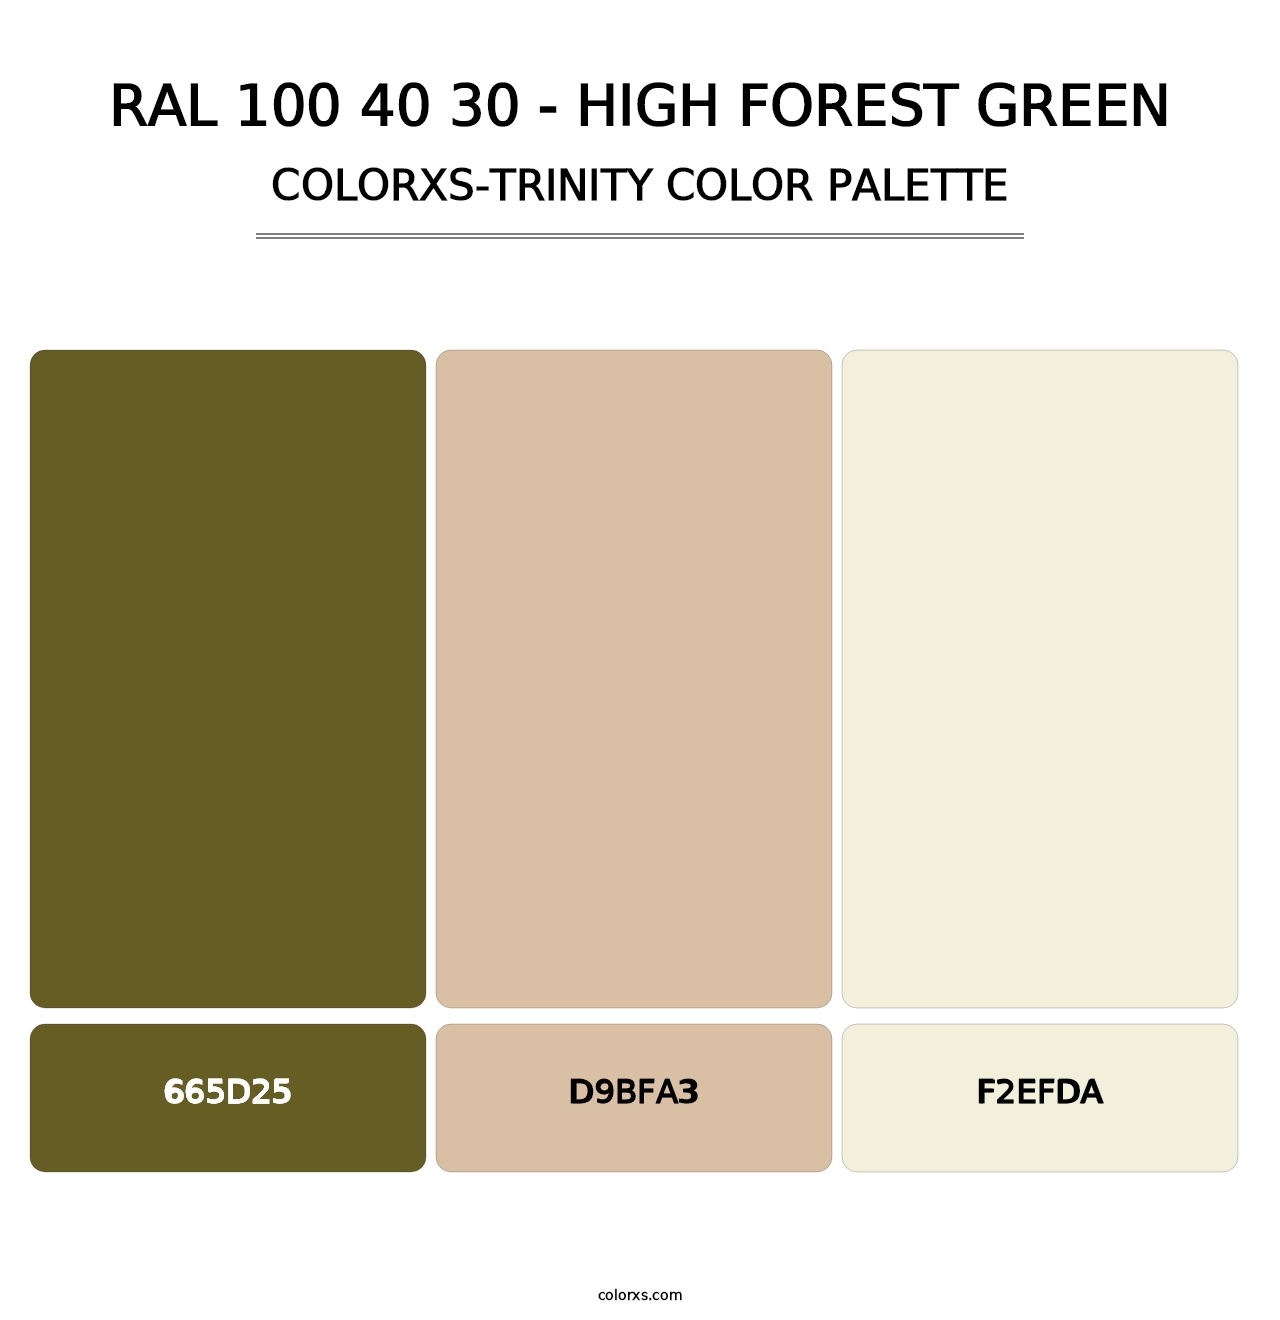 RAL 100 40 30 - High Forest Green - Colorxs Trinity Palette